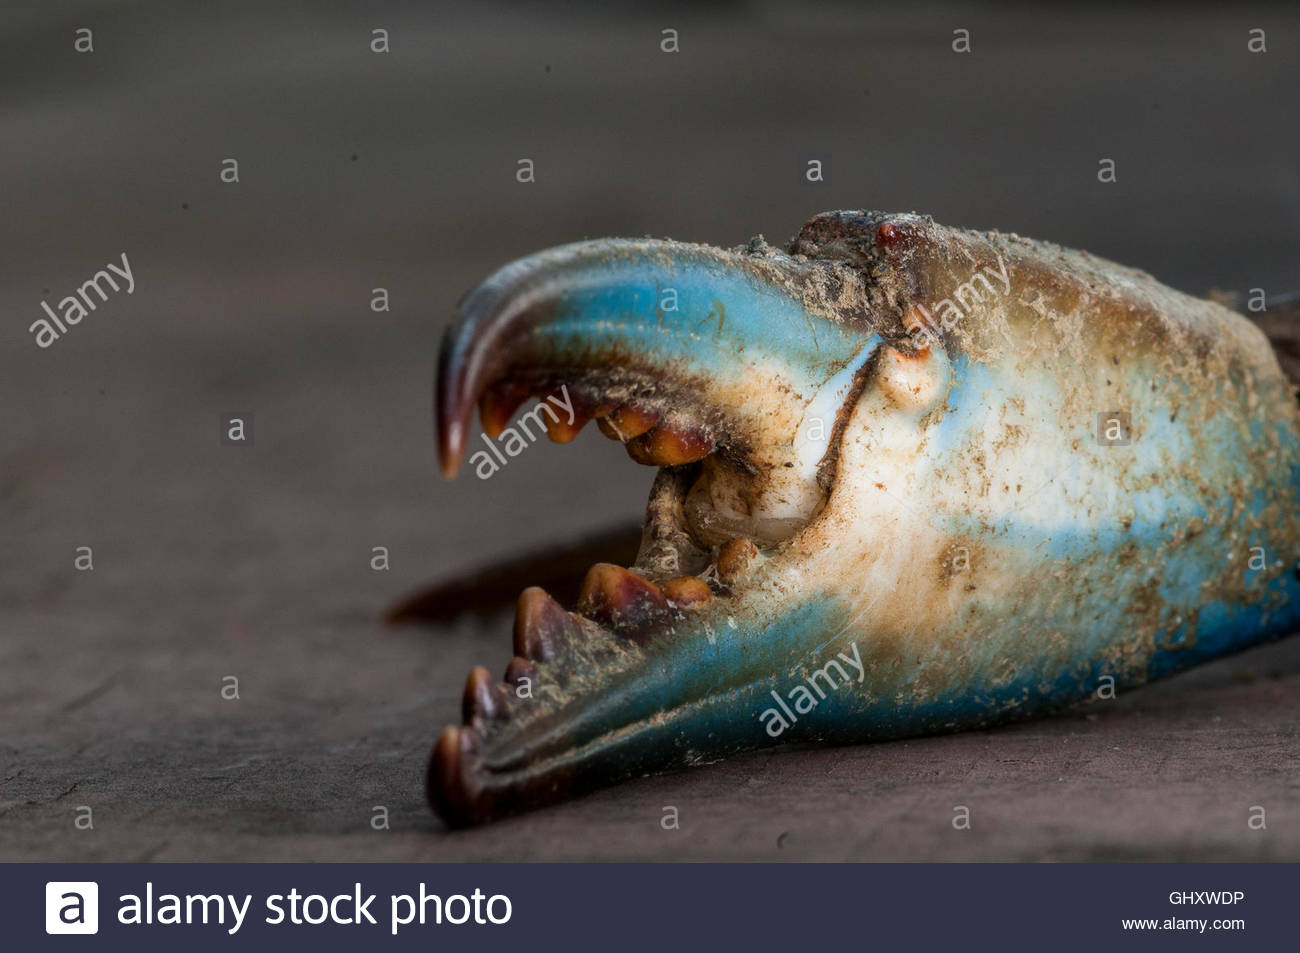 Funny Crab Stock Photos & Funny Crab Stock Images - Alamy